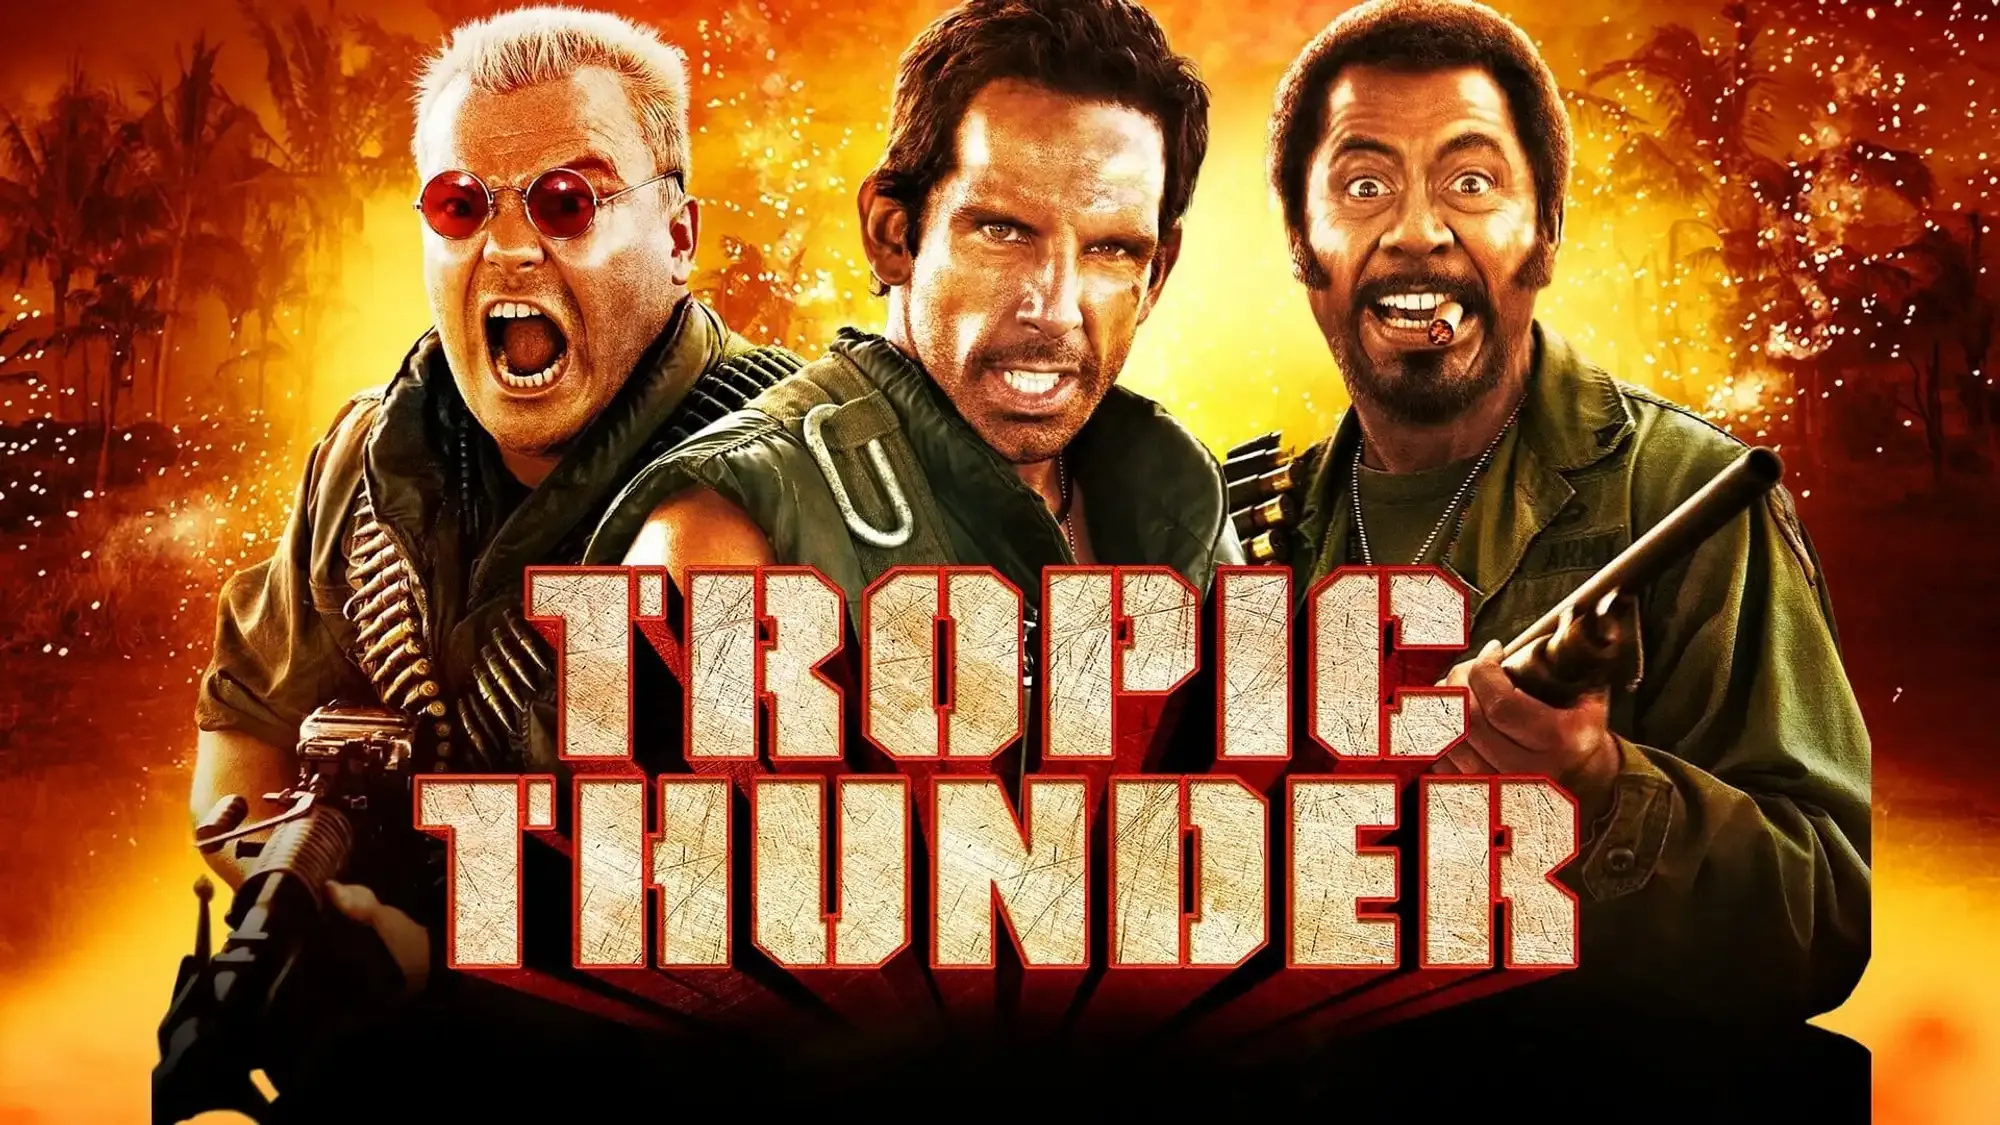 Tropic Thunder movie review